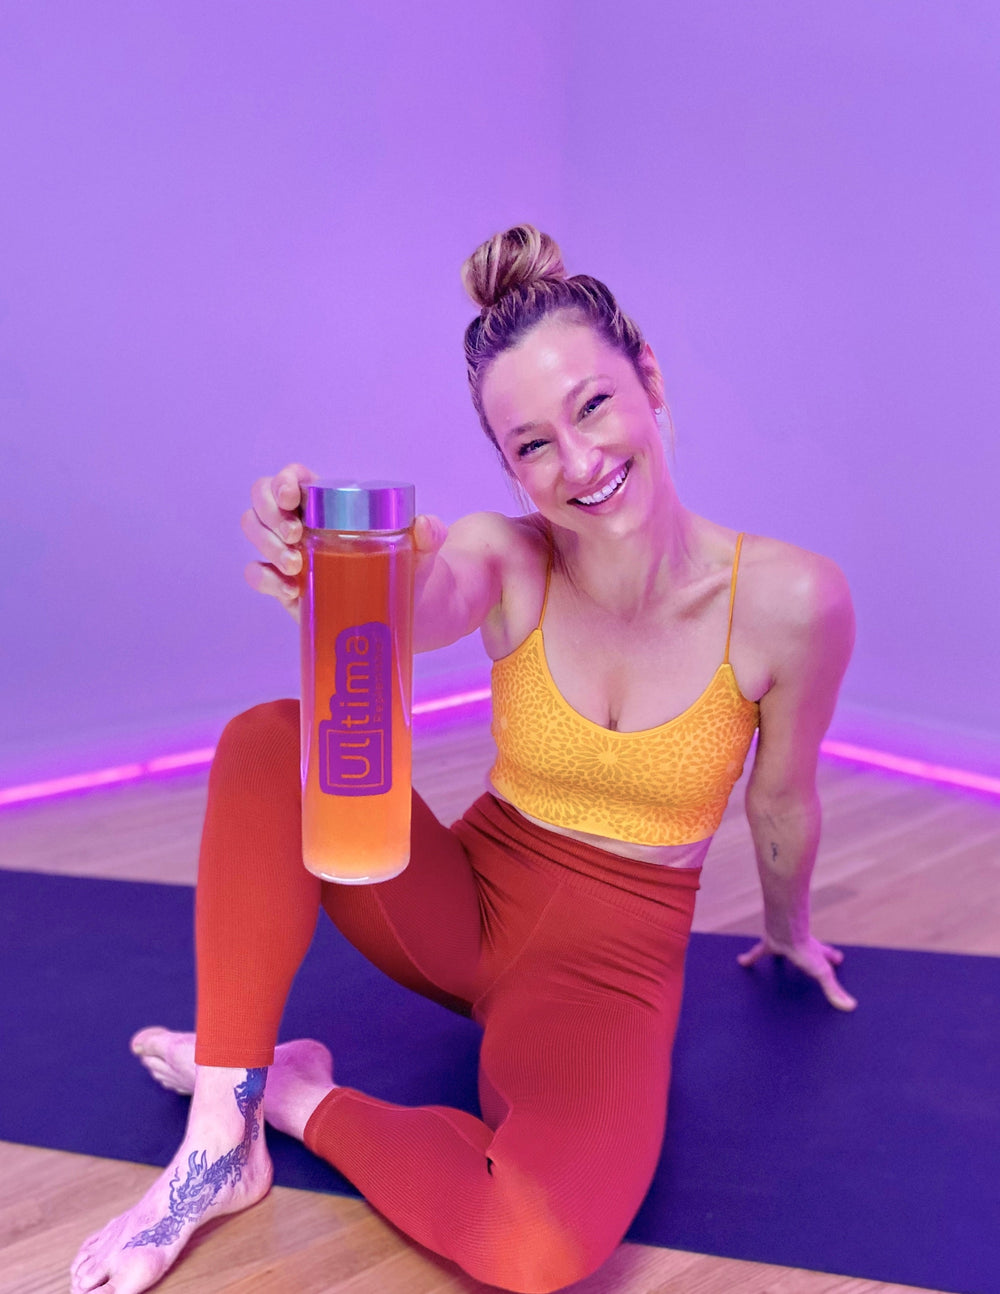 5 Energy Boosting 5 Minute Workouts From Celebrity Trainer Marnie Alton